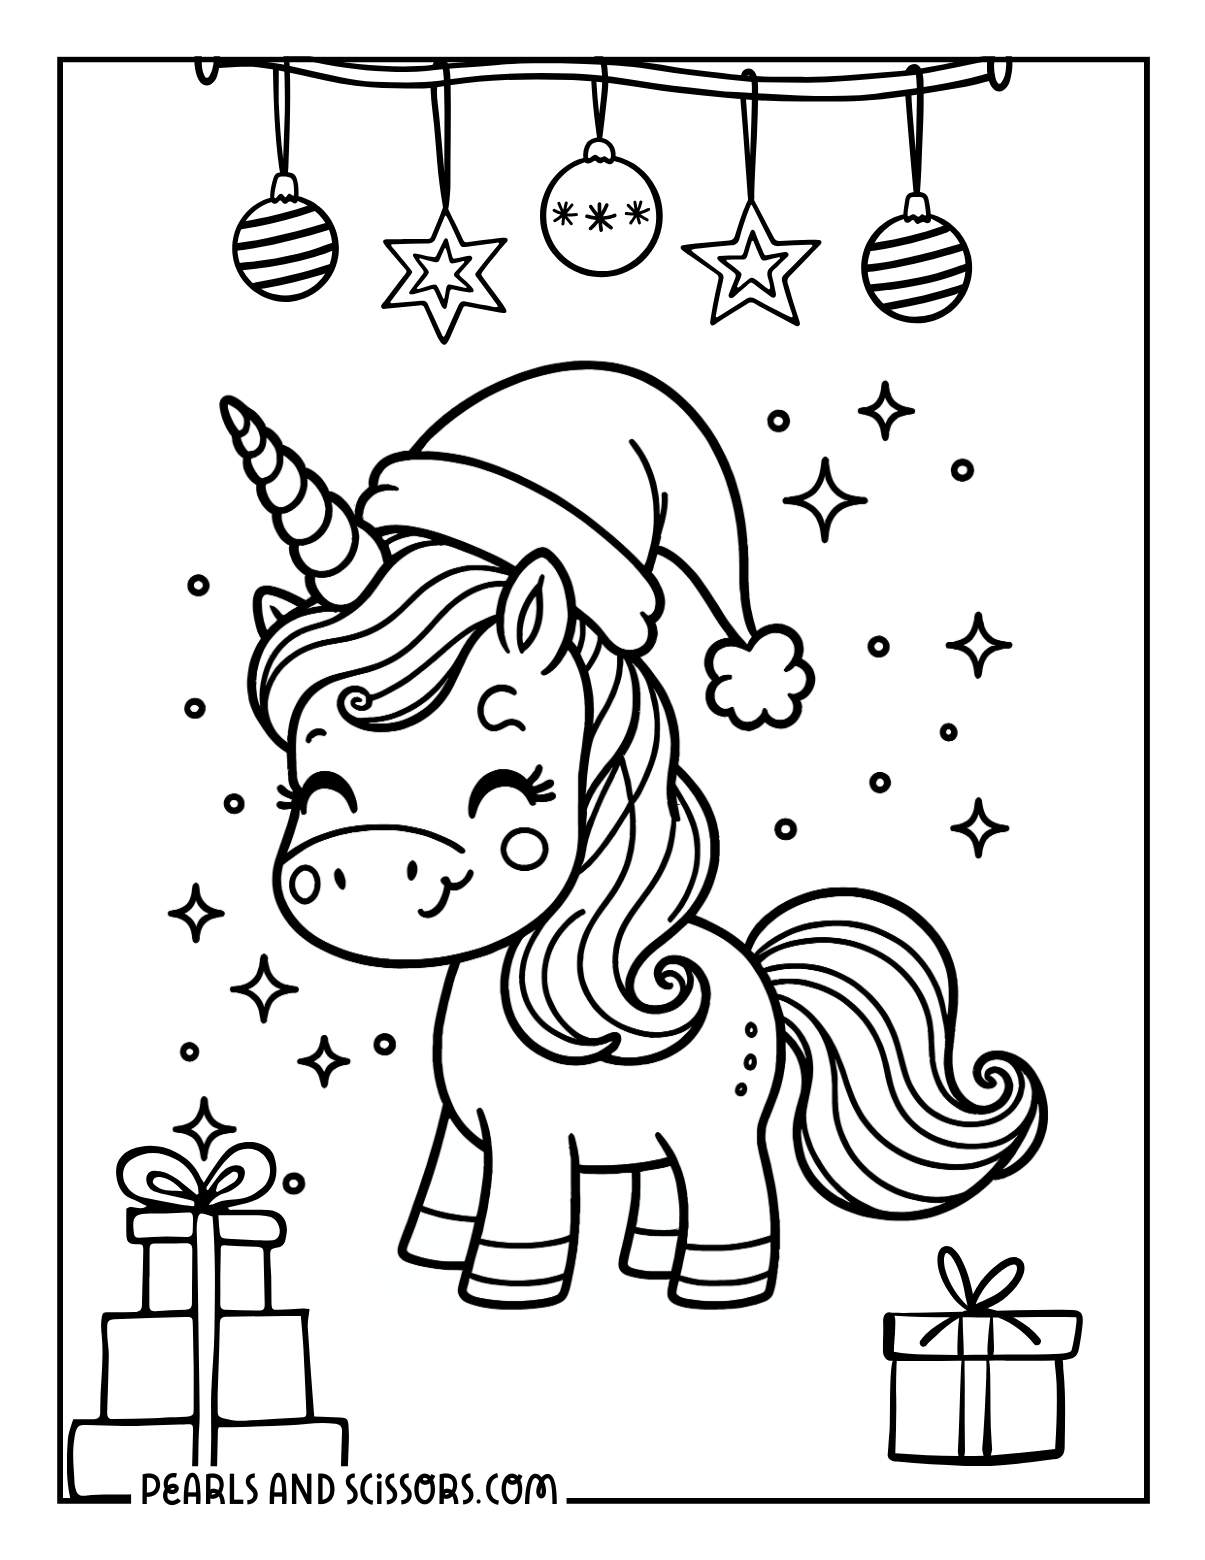 Cute unicorn opening christmas presents coloring page.